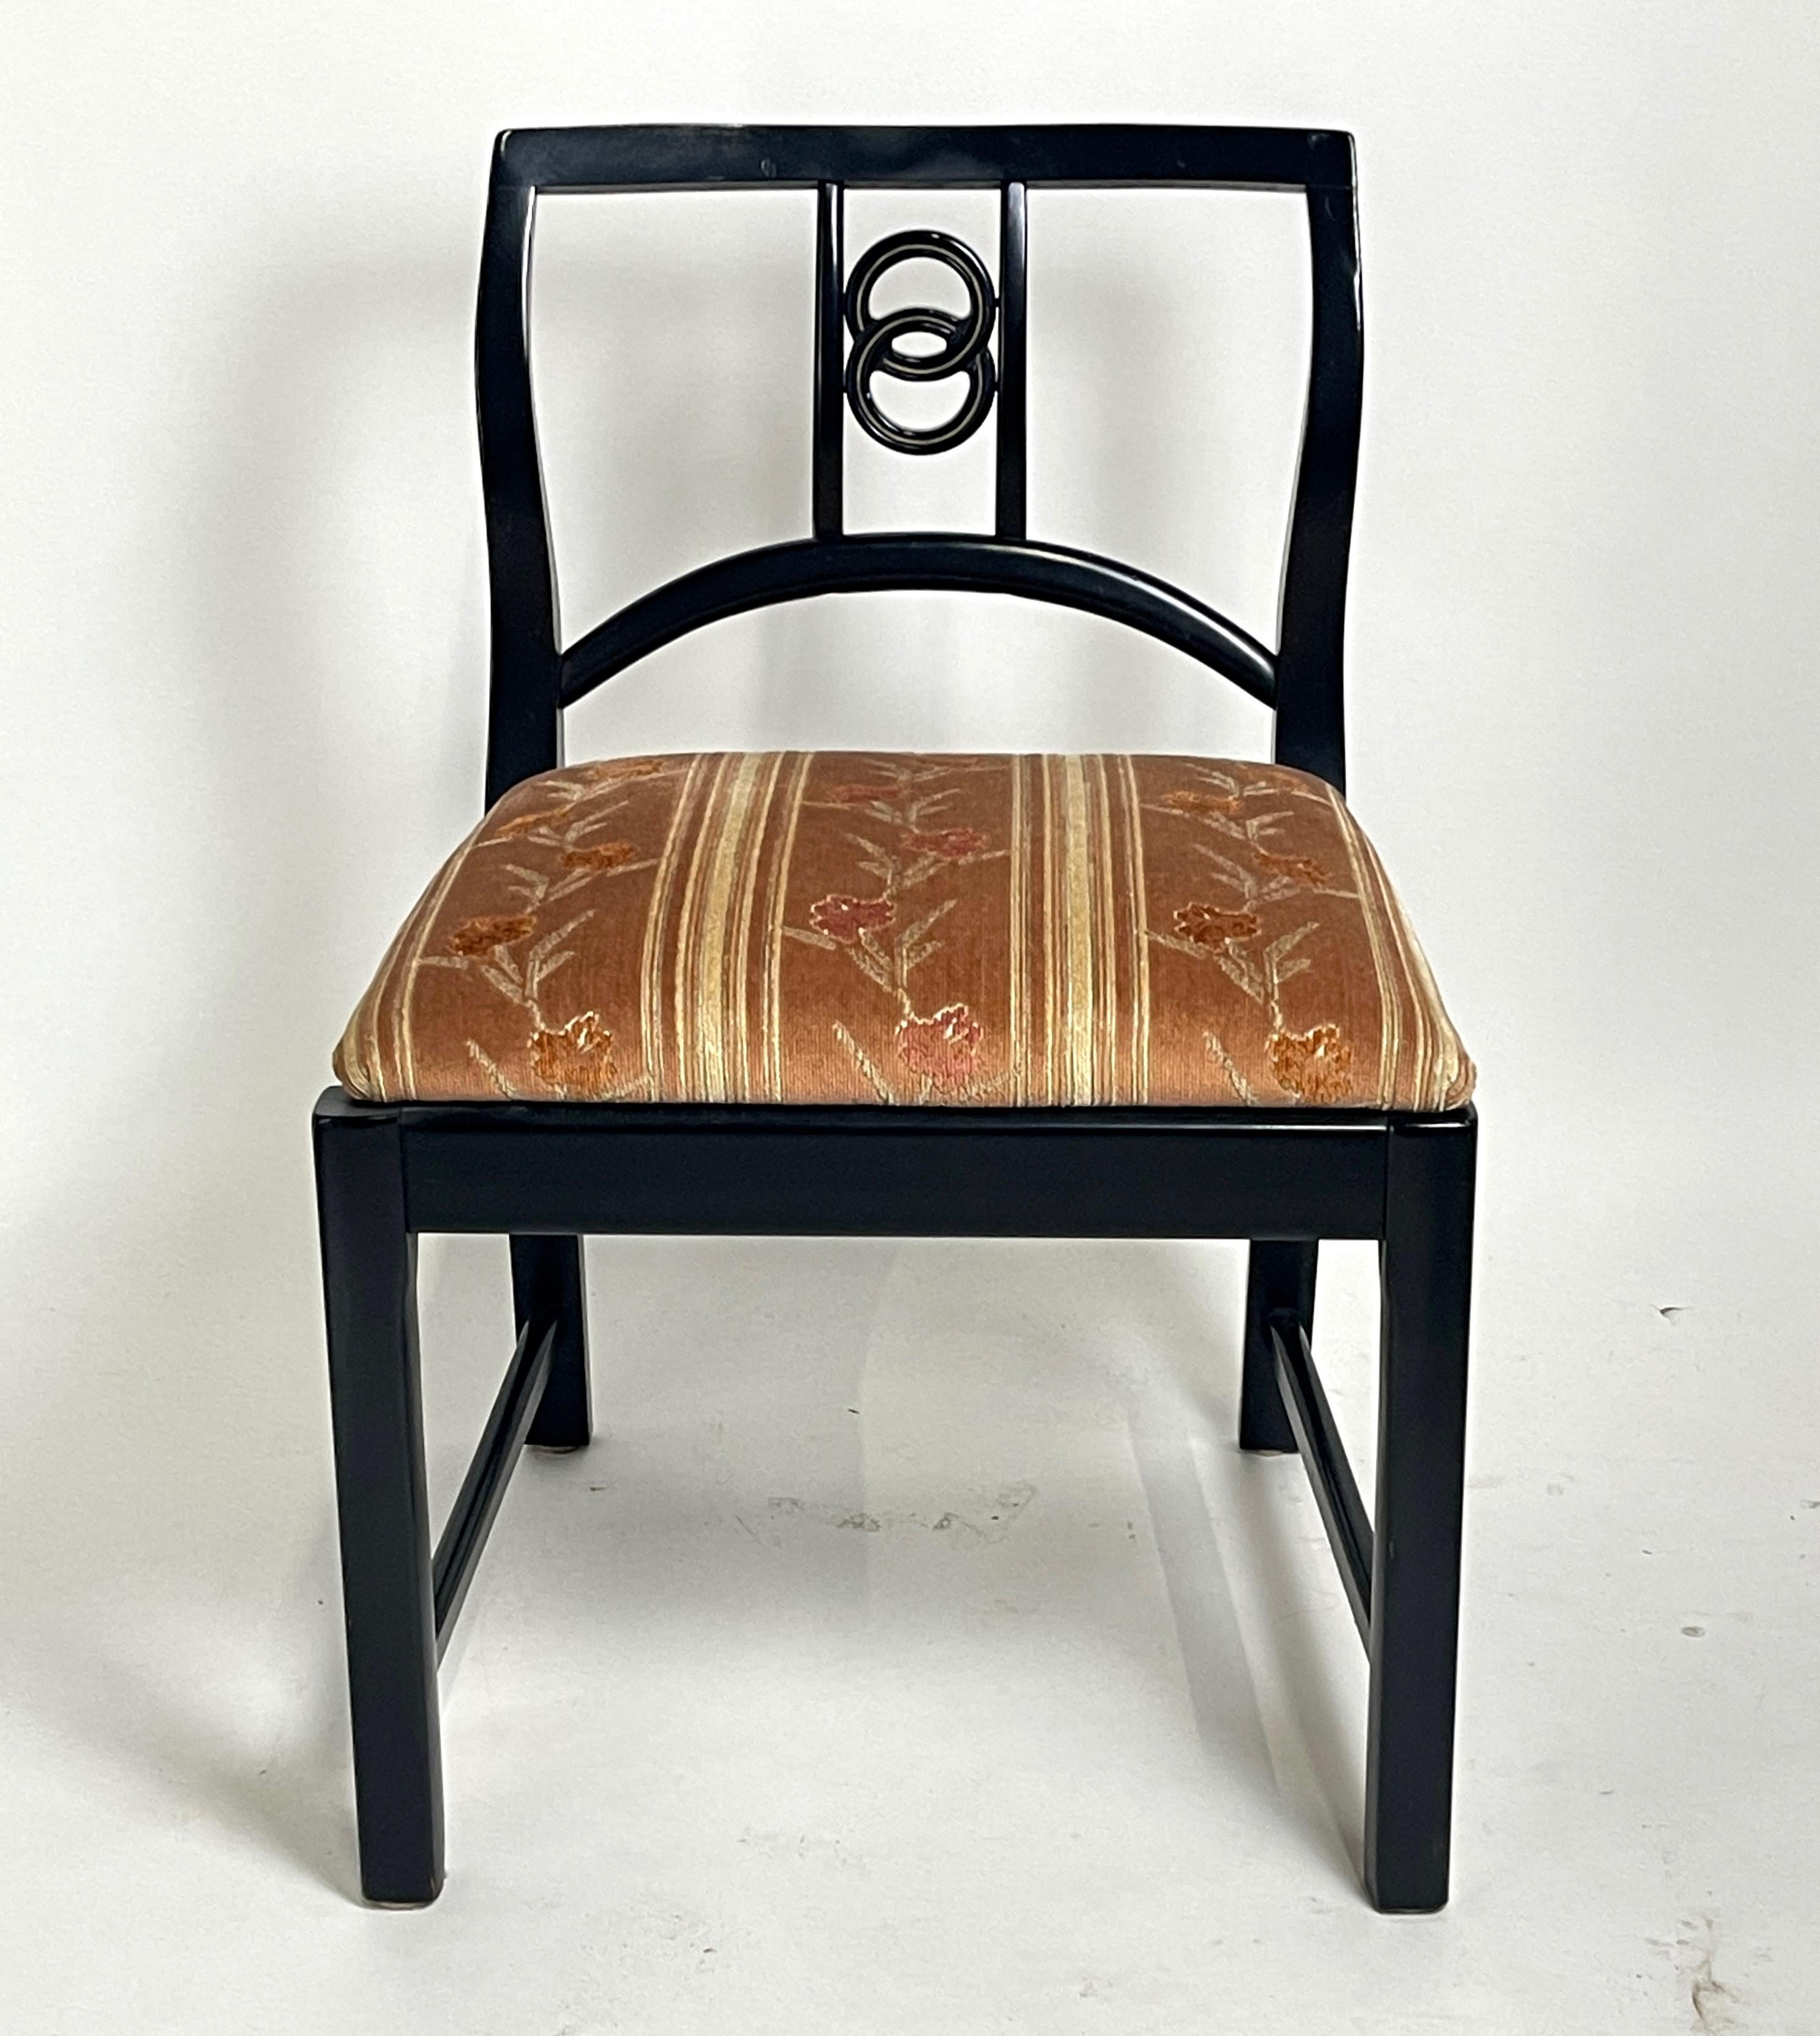 Rare and fabulous set of Michael Taylor for Baker dining chairs which includes 4 side chairs and 2 armchairs in very good original condition. The frames are constructed of a lovely semi matte lacquered mahogany while the seats are upholstered in a